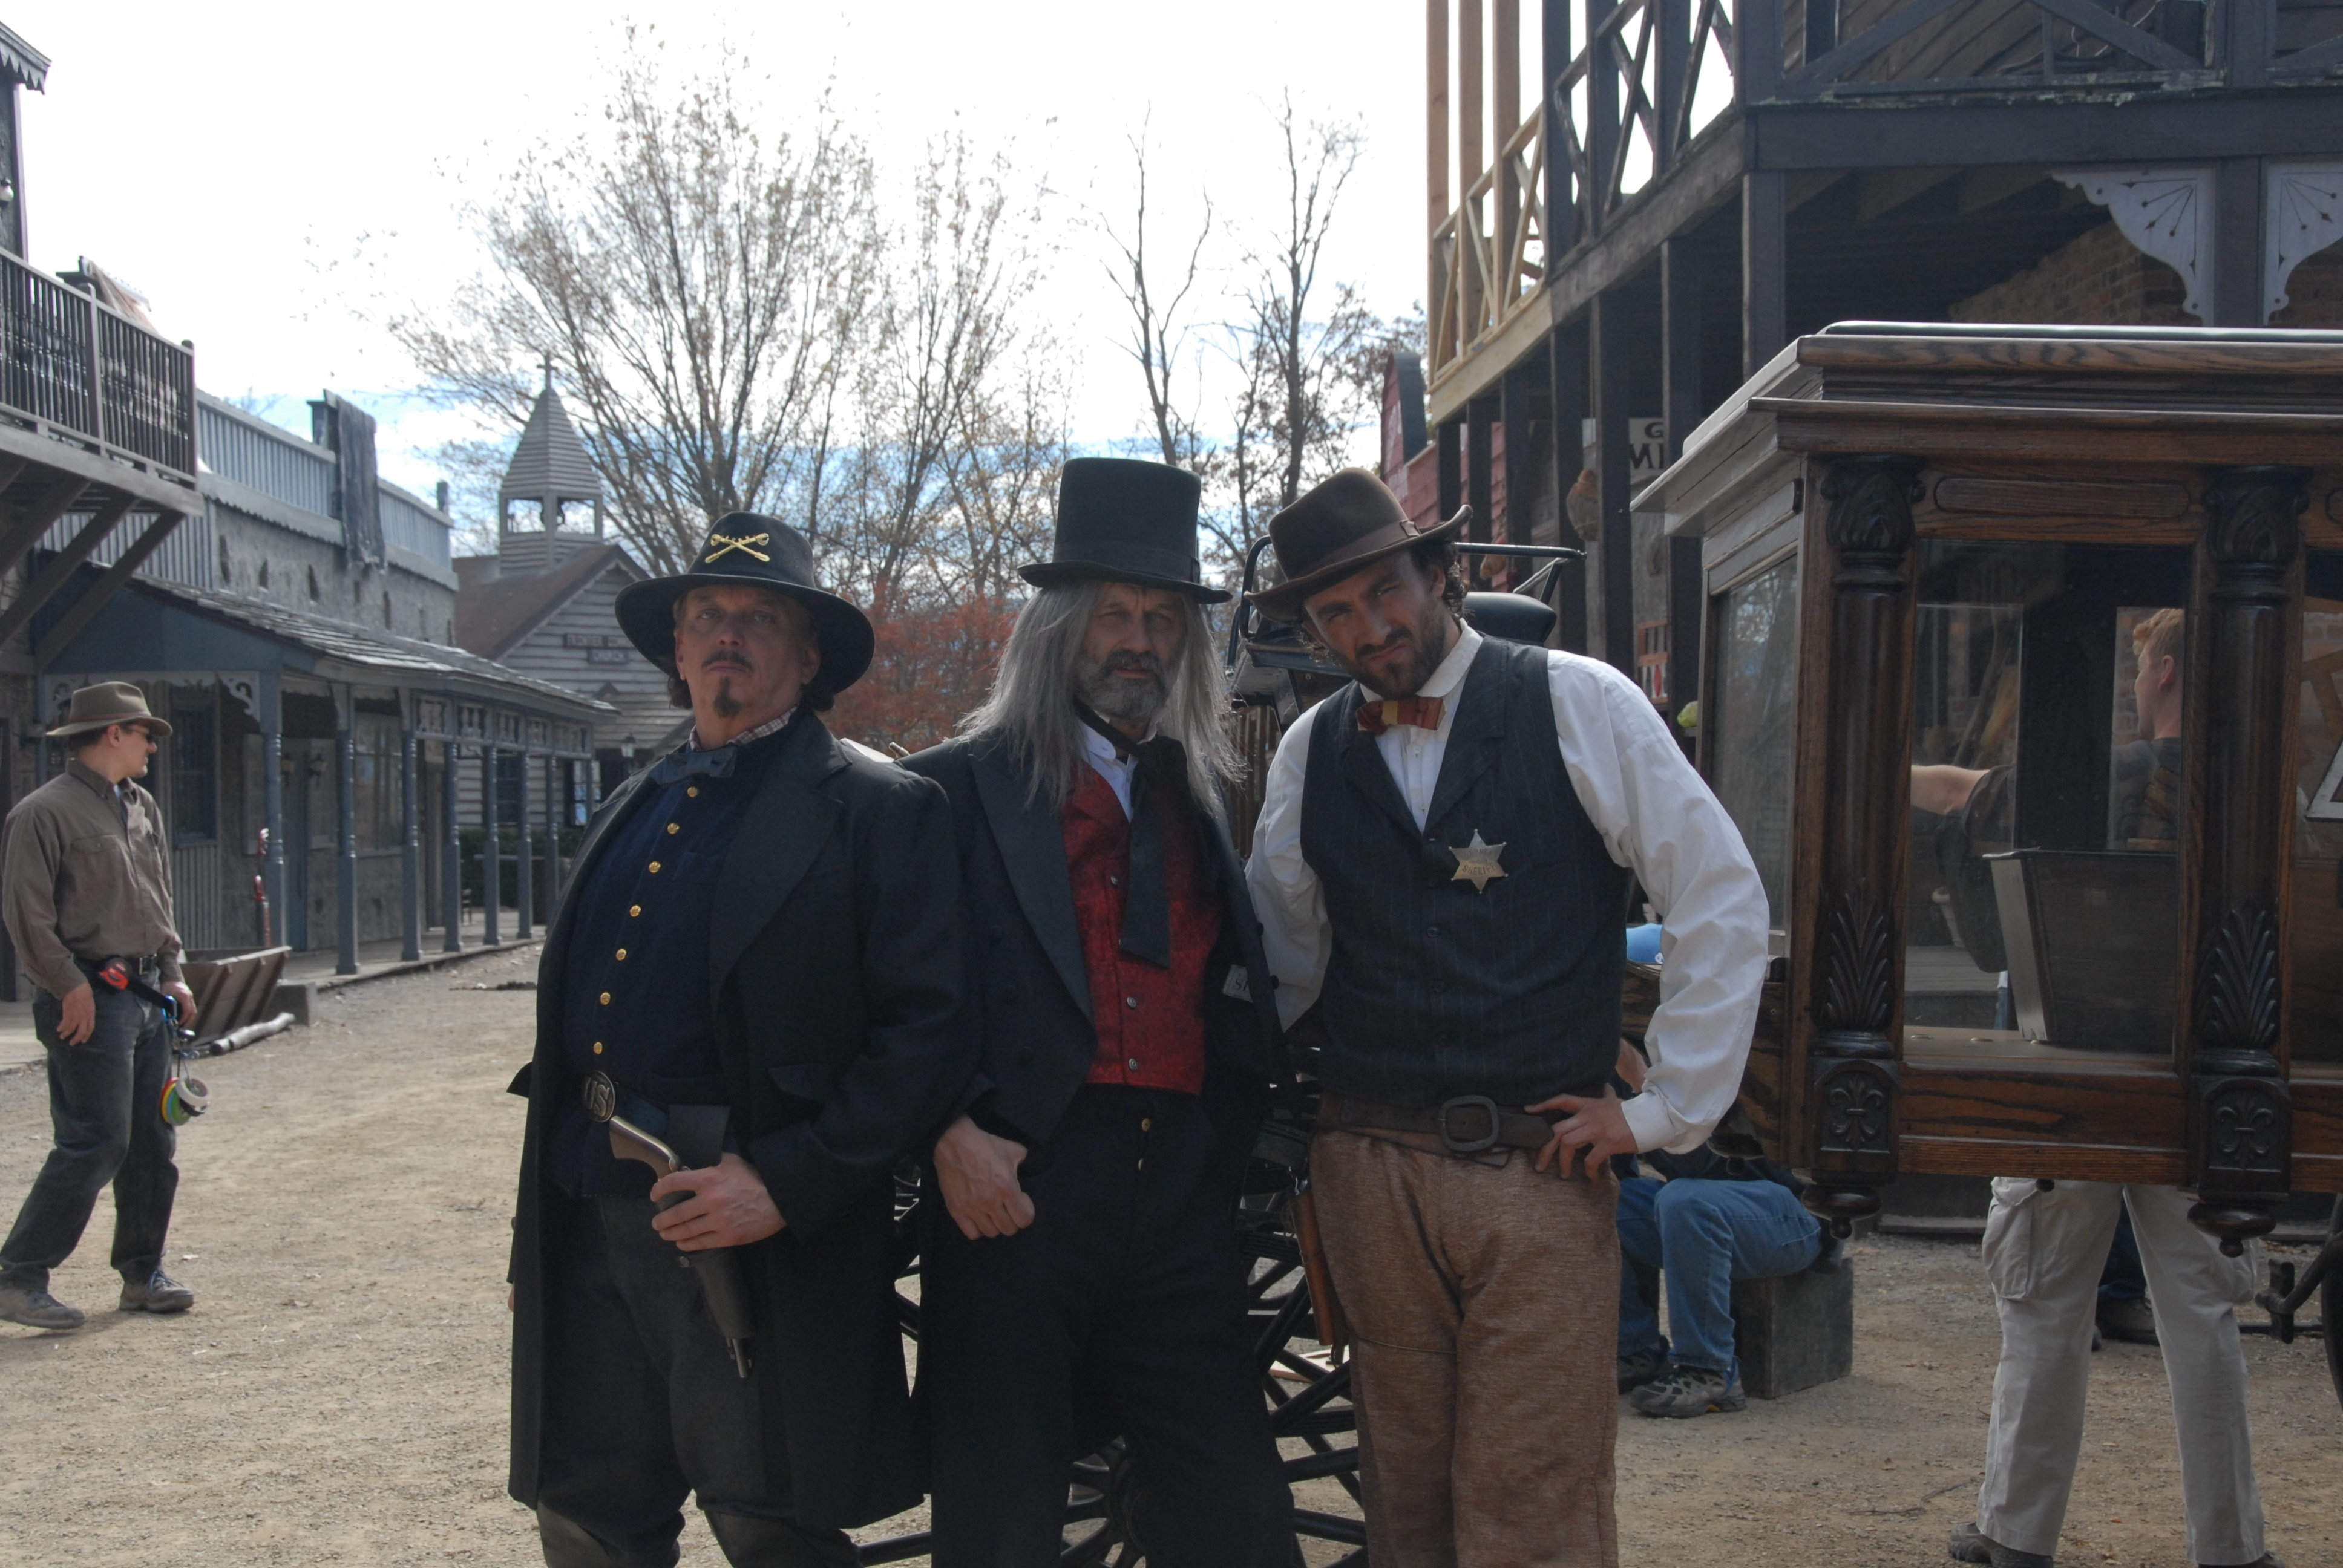 From left, actors Anthony Hornus as Captain Ketner (An Ordinary Killer, Miracle at Sage Creek), Dean Teaster, as Digger (Figure in the Forest, An Ordinary Killer, ER) and Taymour Ghazi, Deputy Wilson (Tangy Guacamole) on the set of Ghost Town, filmed in M